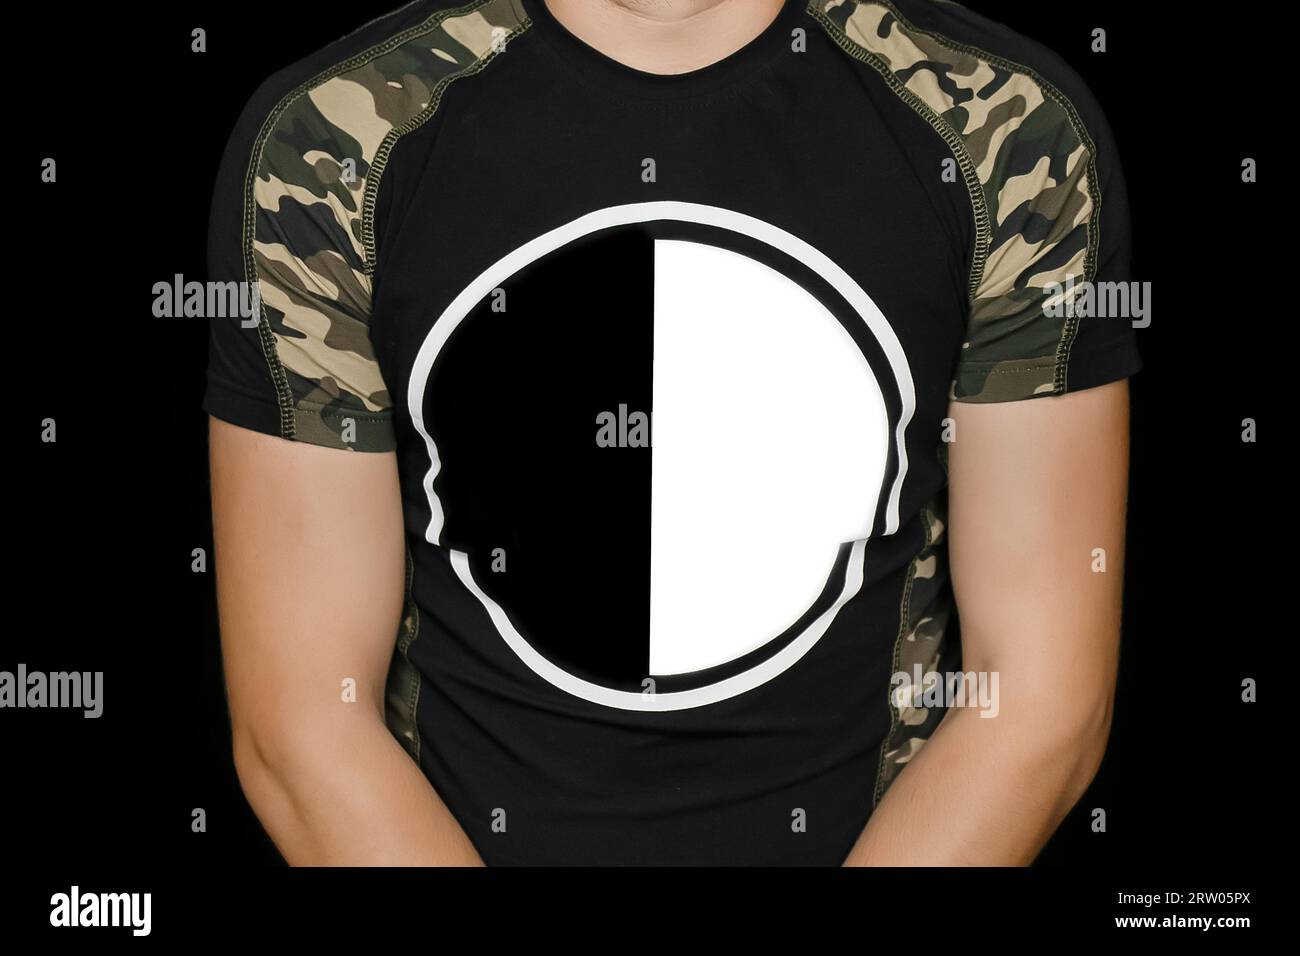 Yin and yang sign symbol black and white contrast round circle on the T-shirt for text and design blank space empty background. Stock Photo